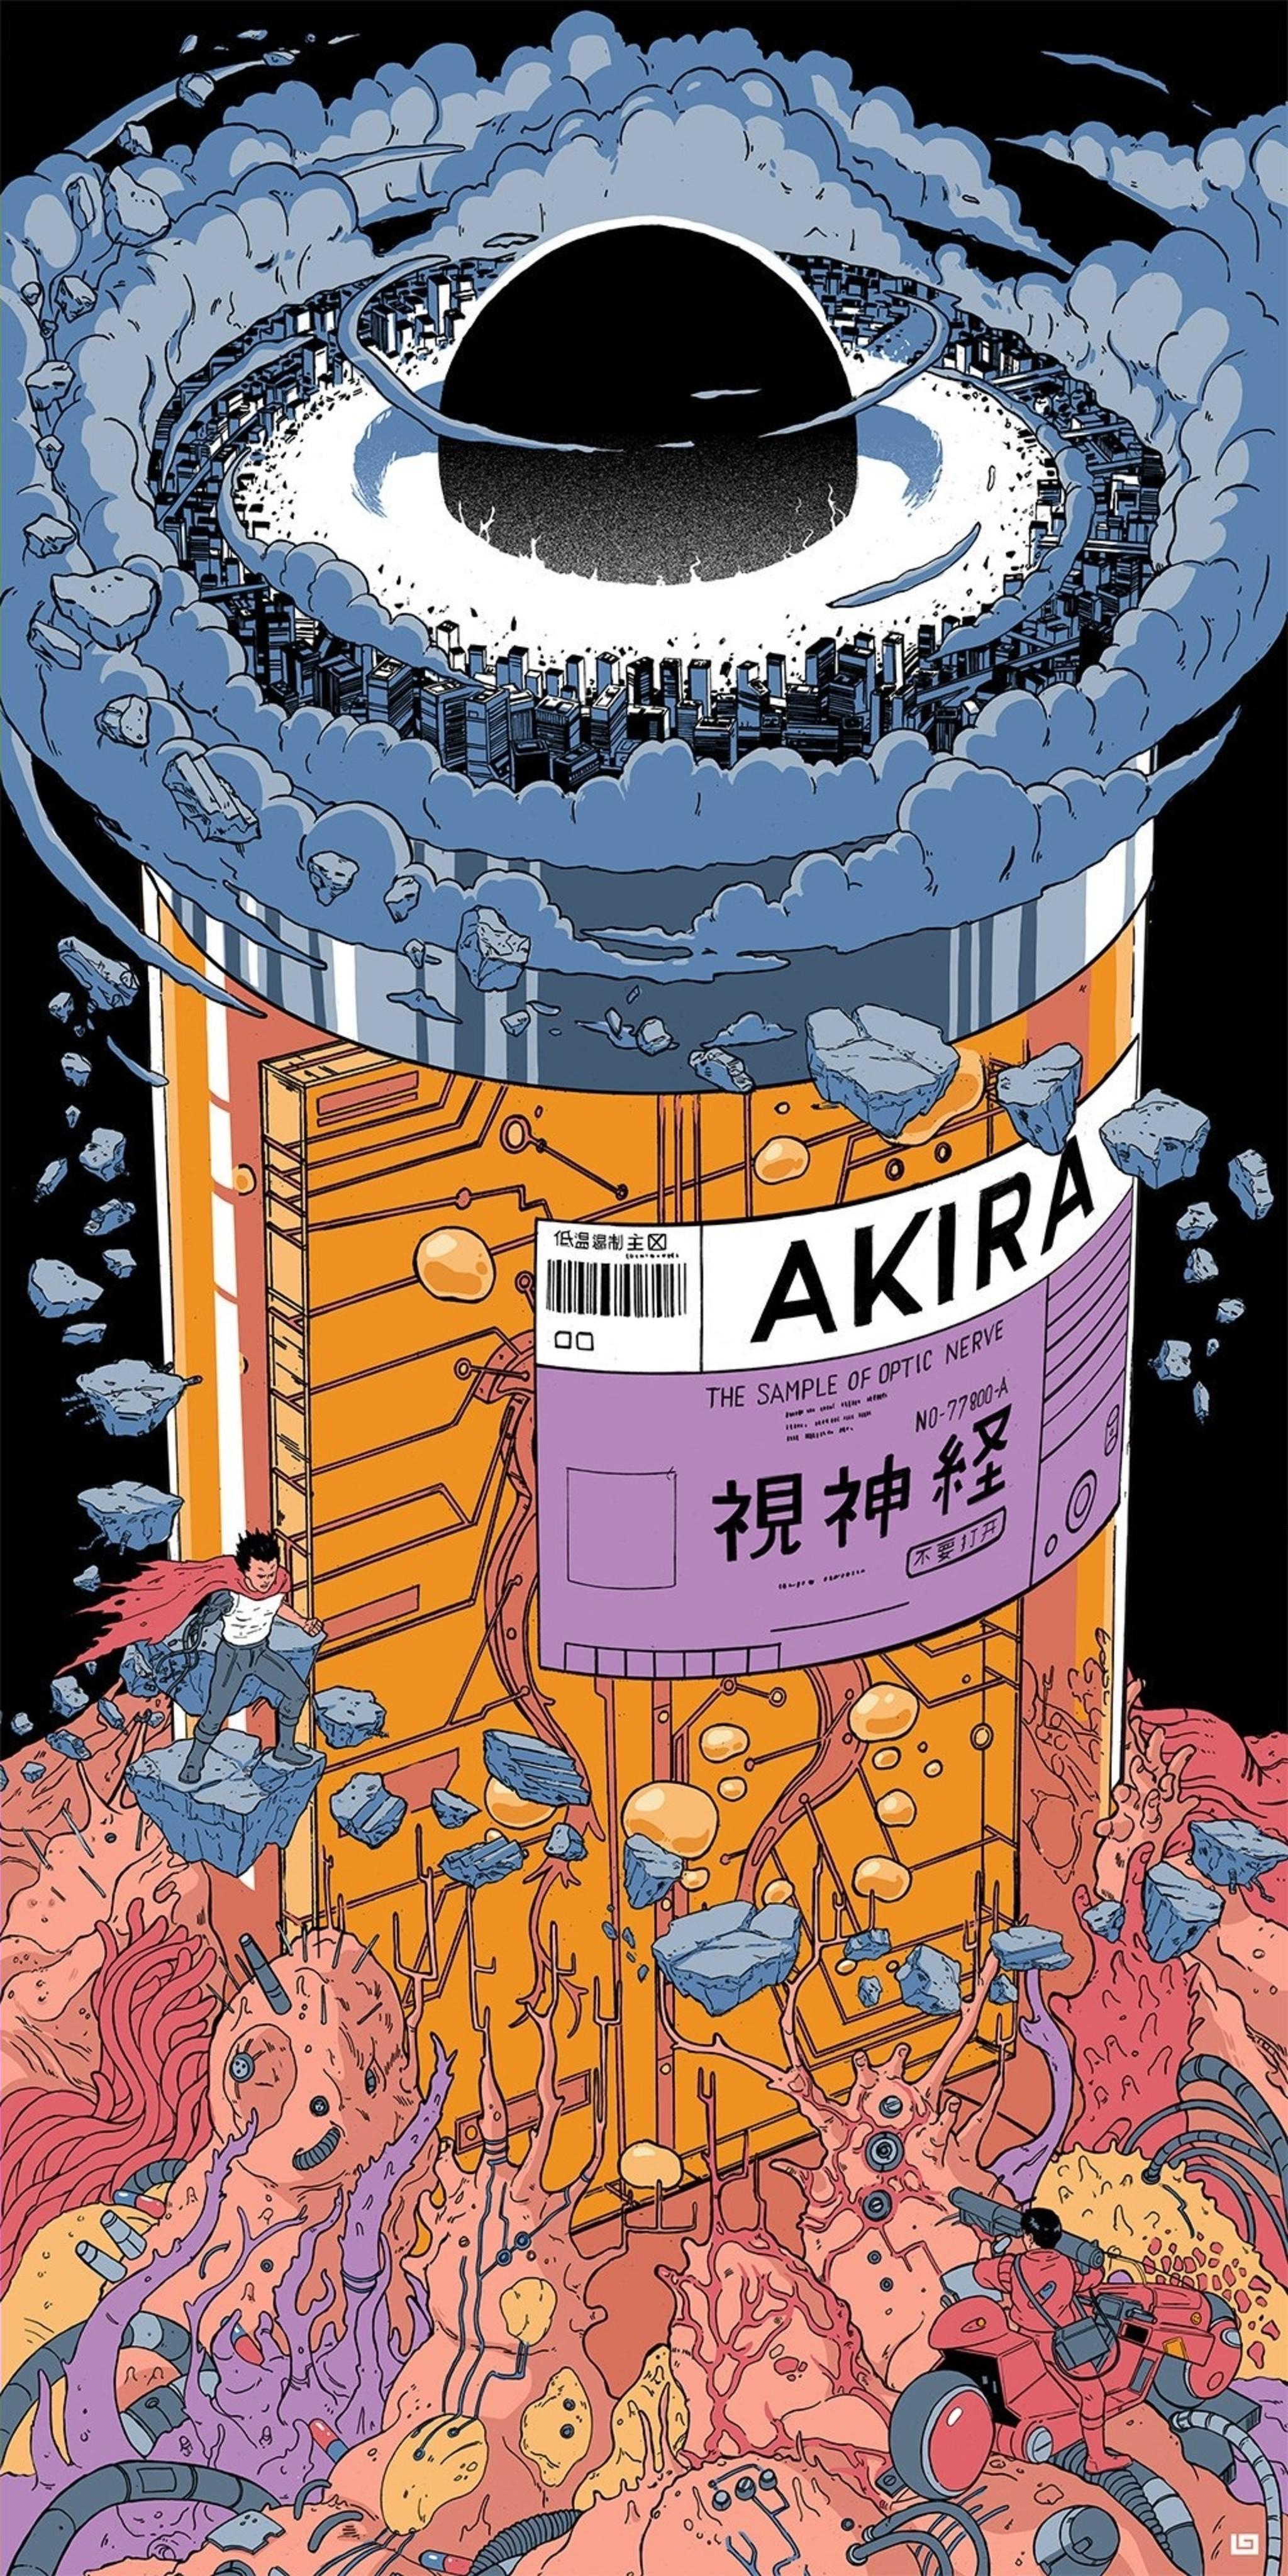 Akira By Laurie Greasley , HD Wallpaper & Backgrounds